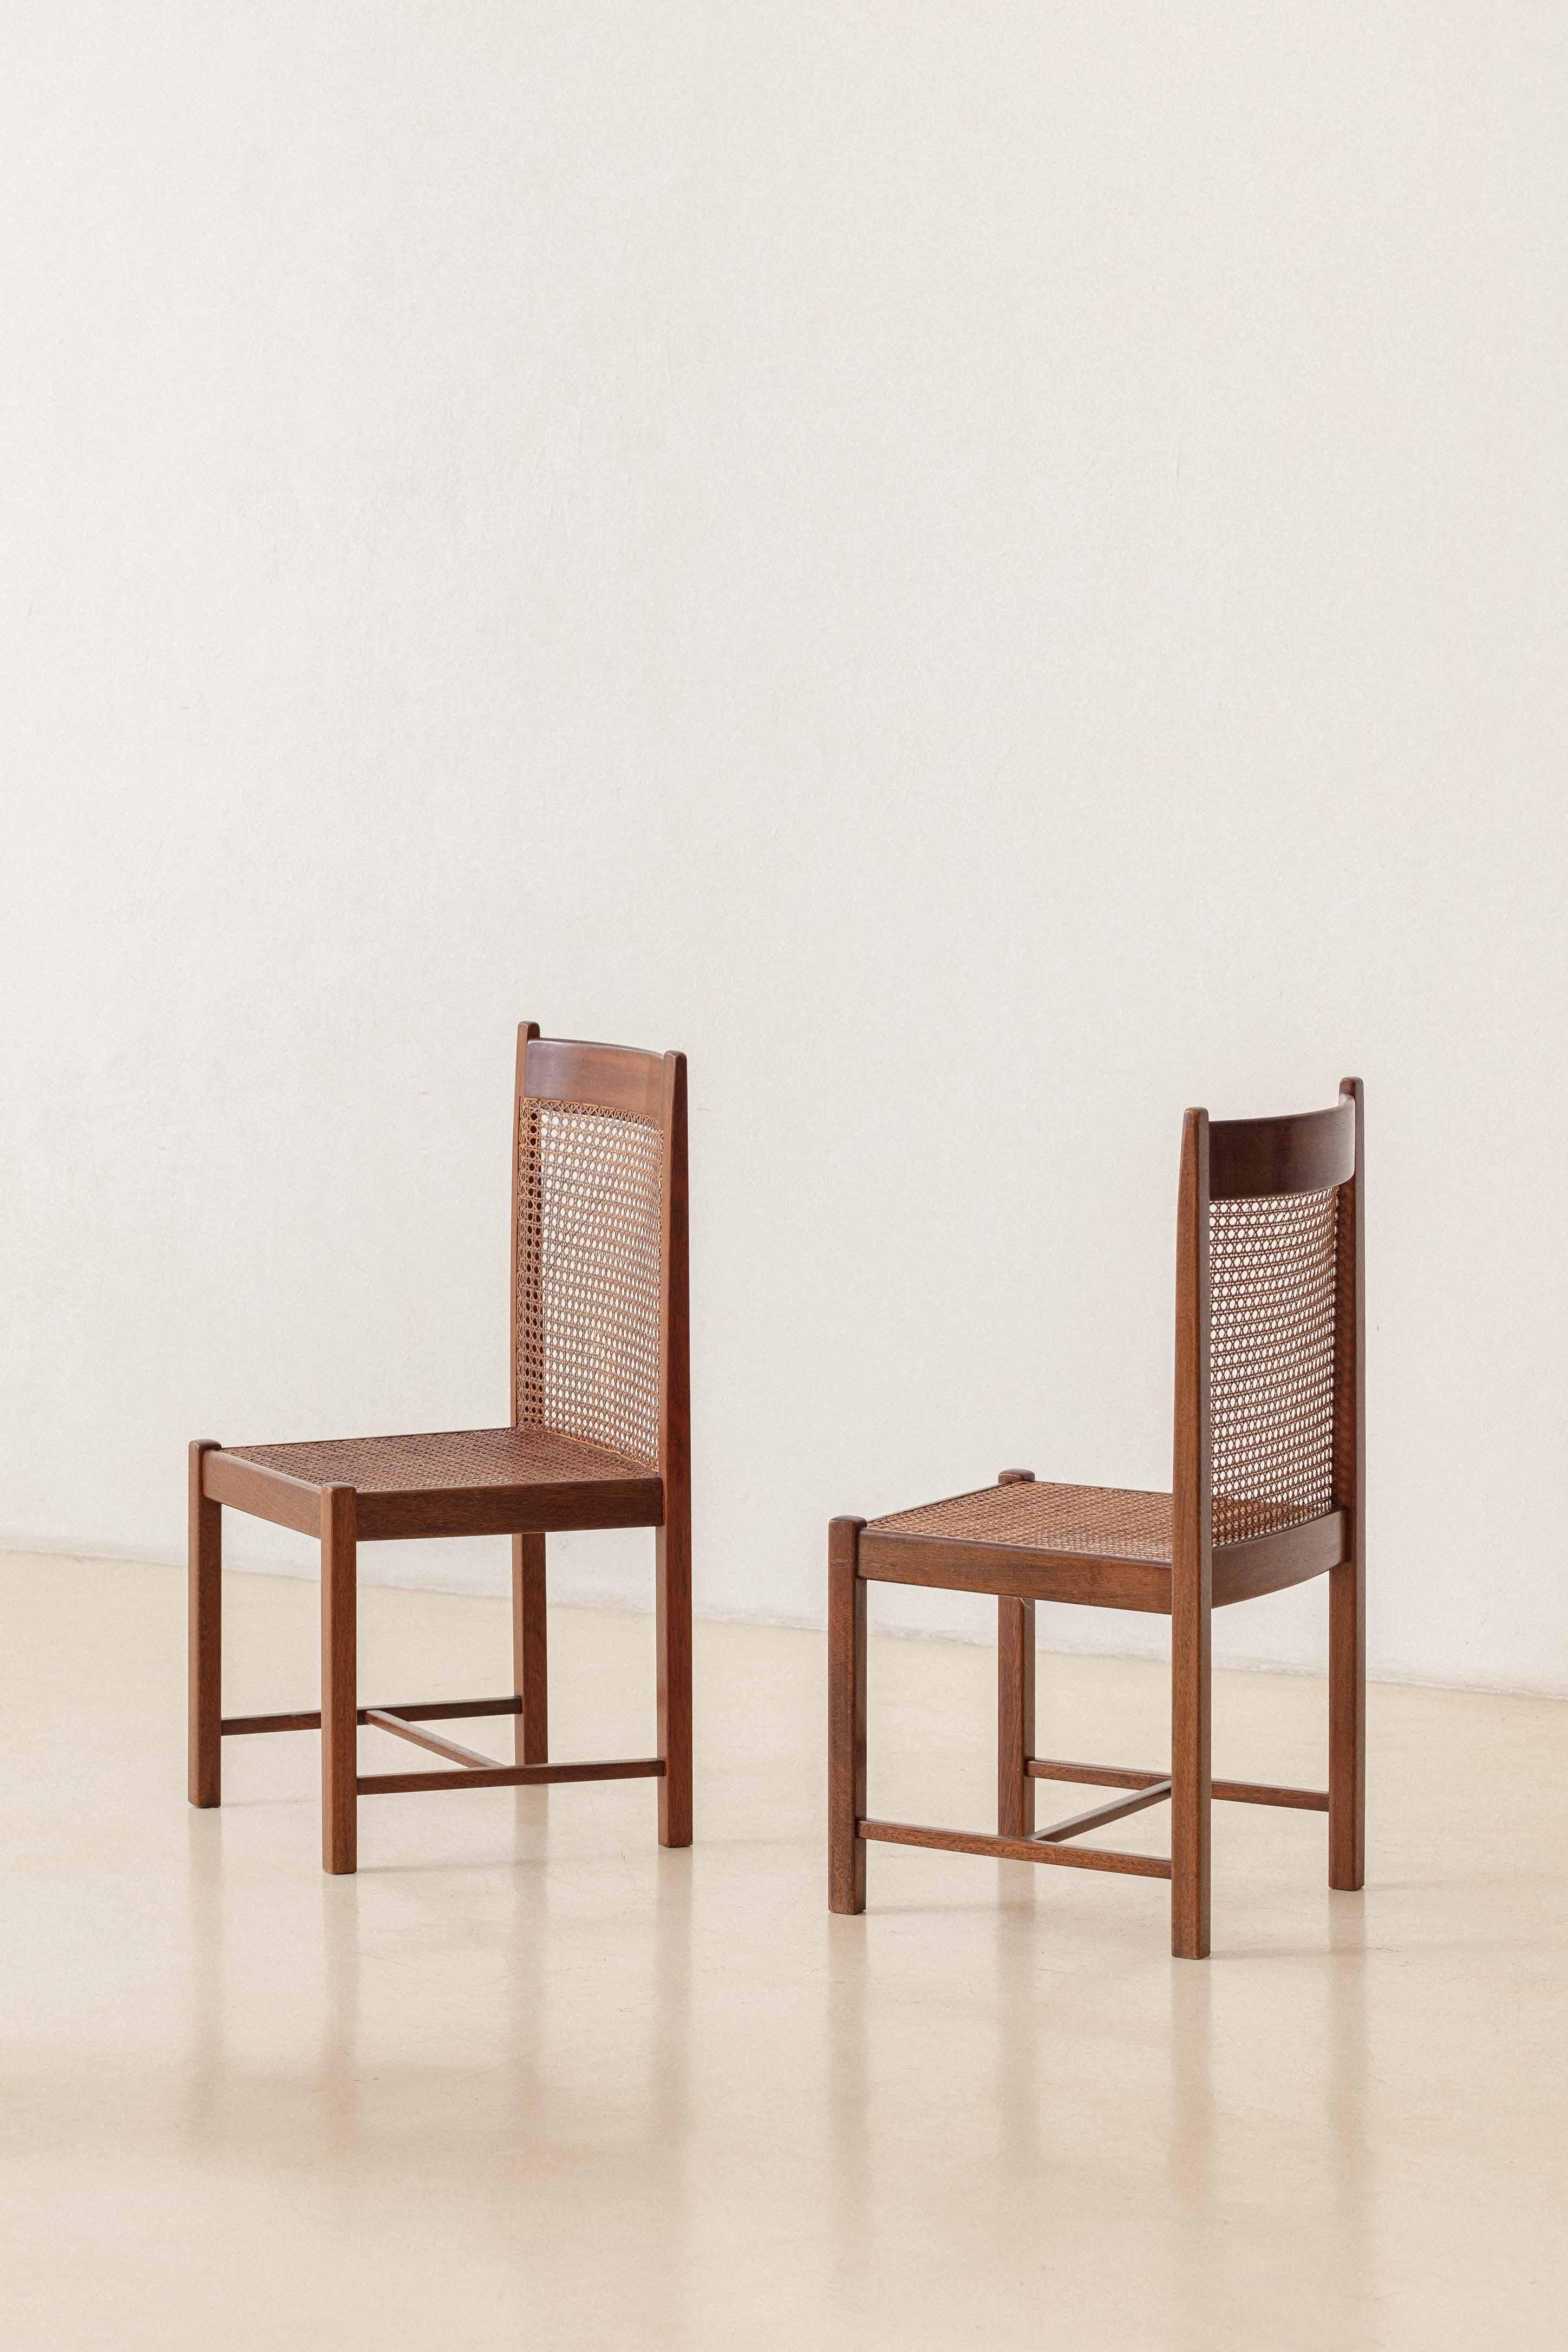 This set of eight Freijo wood chairs was manufactured by Fatima Arquitetura Interiores (FAI) in the 1960s.

These pieces called our attention for many design reasons. First, the combination between seat and back as a single cane volume. Second,